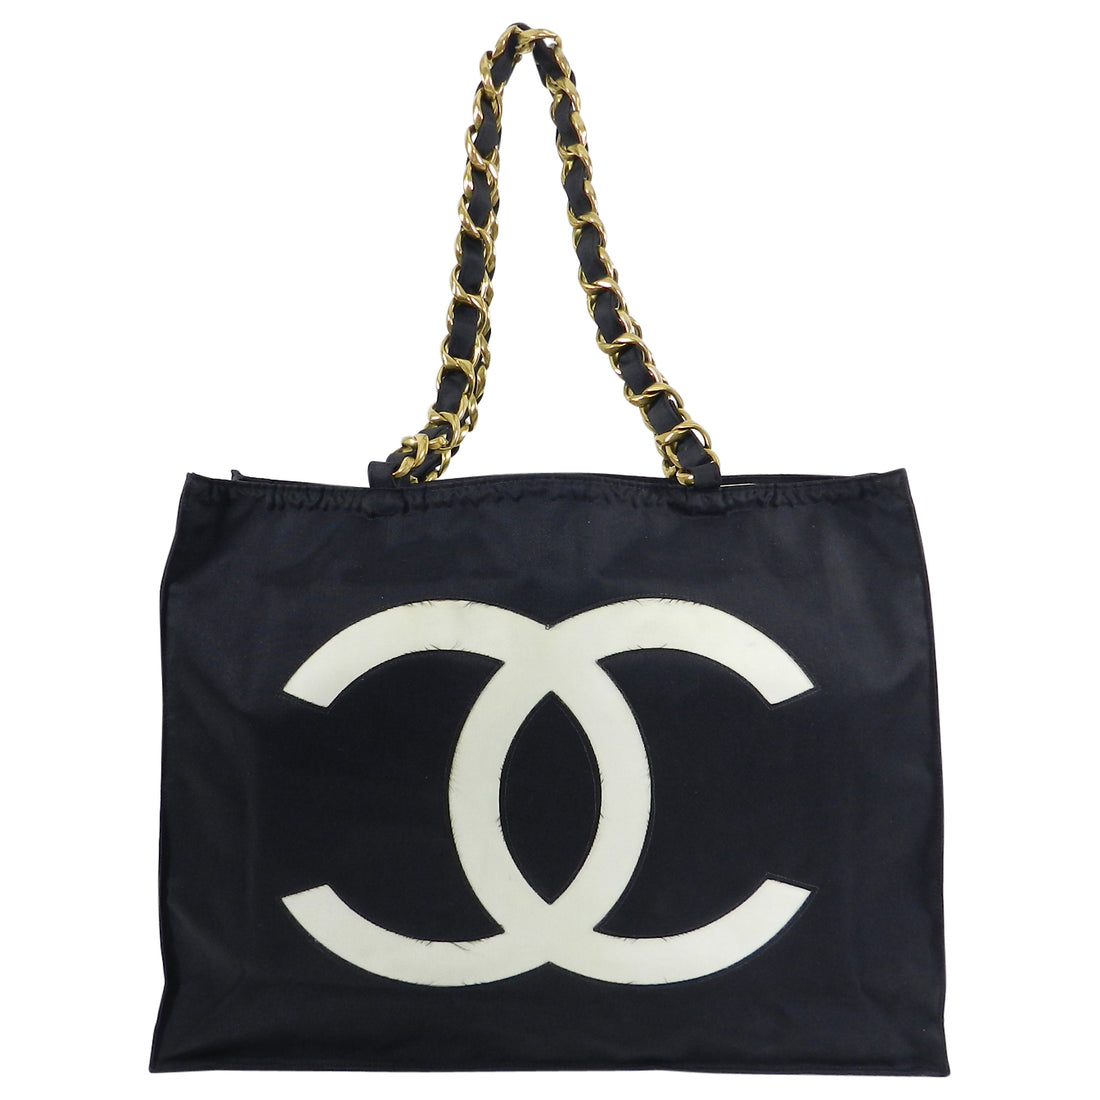 Chanel Quilted Beige Calfskin Thin City Accordion Turnlock Large Tote Bag,  2013.